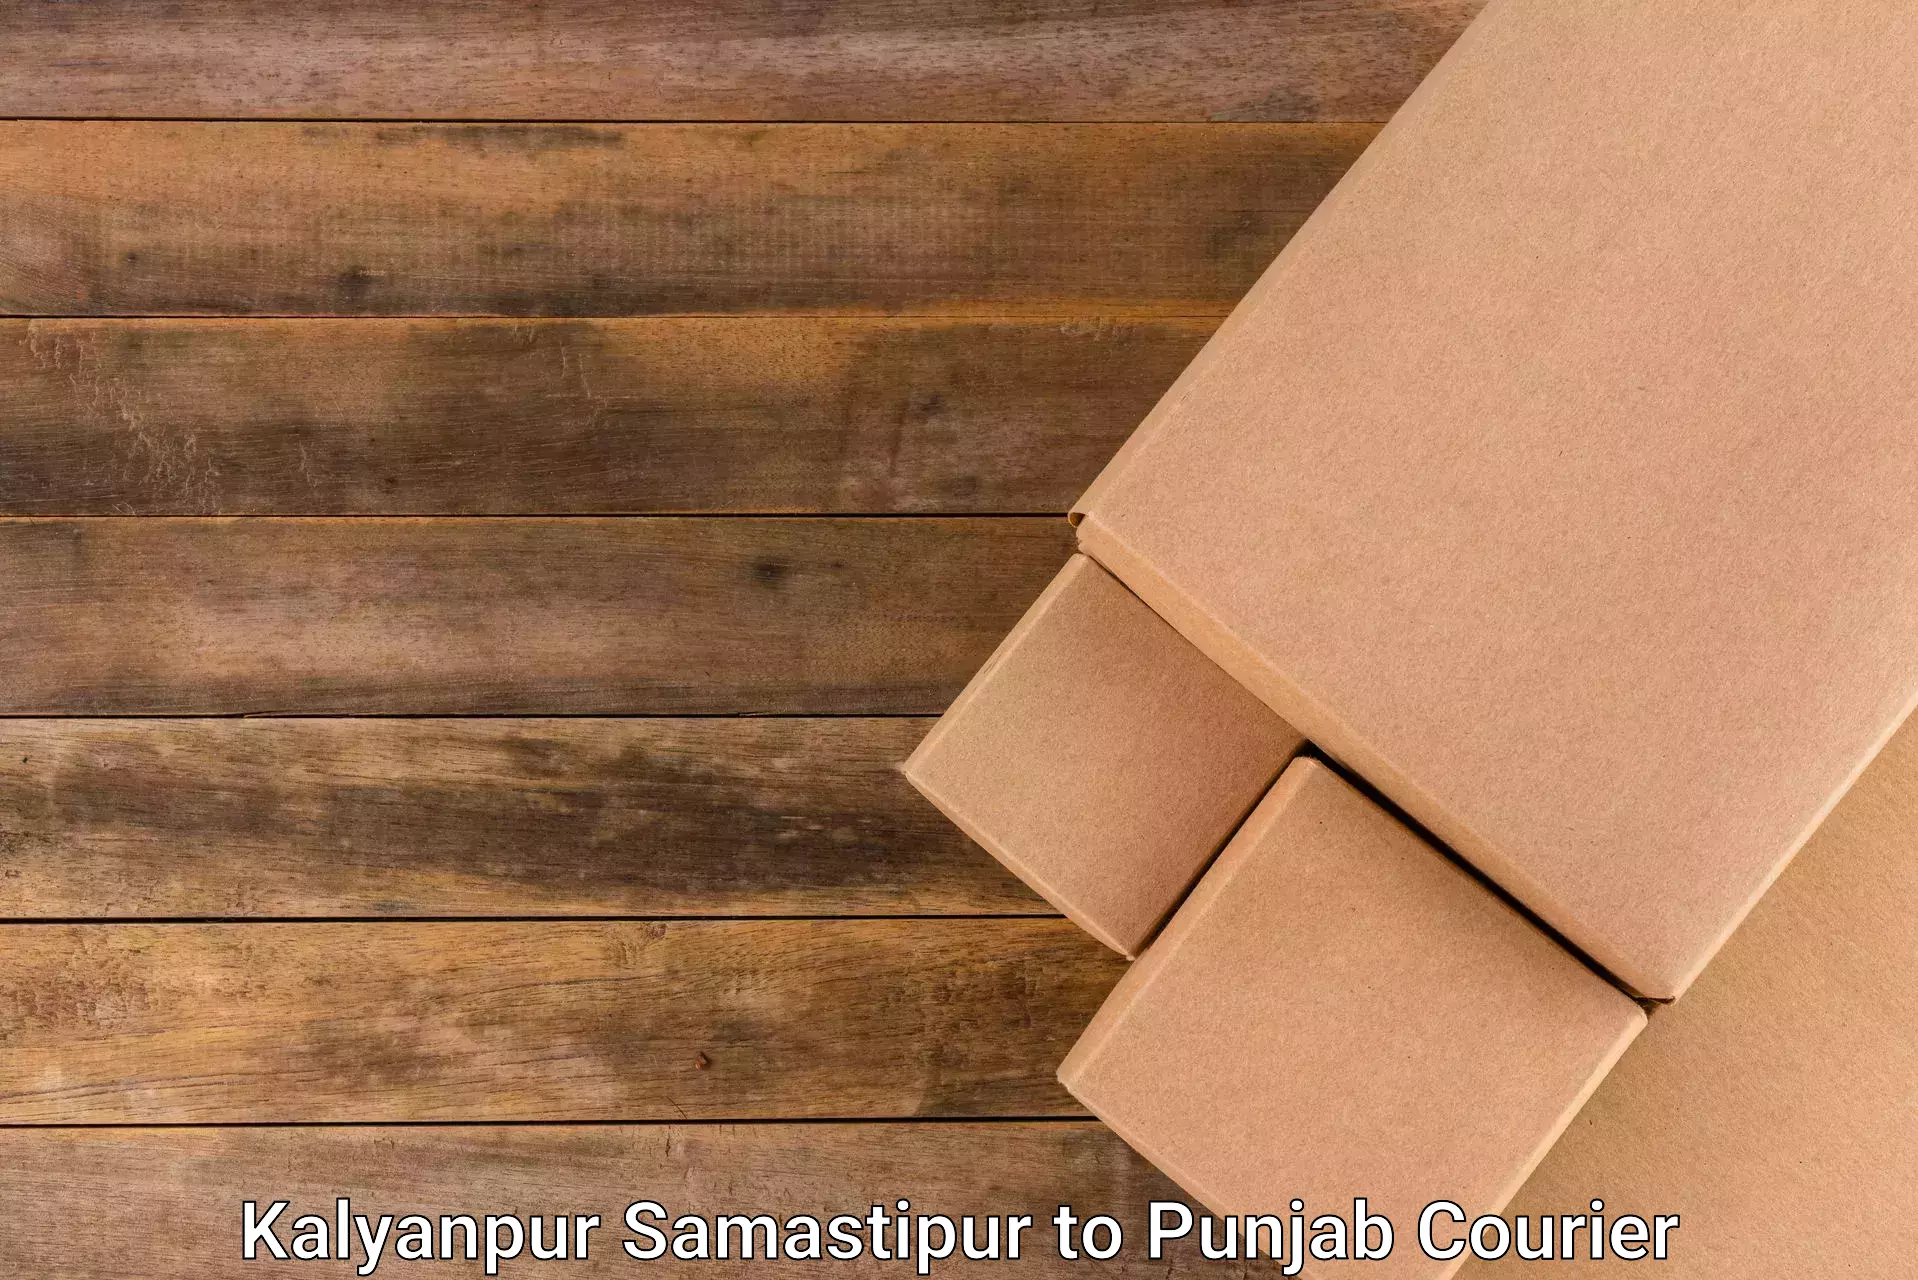 Affordable logistics services in Kalyanpur Samastipur to Abohar